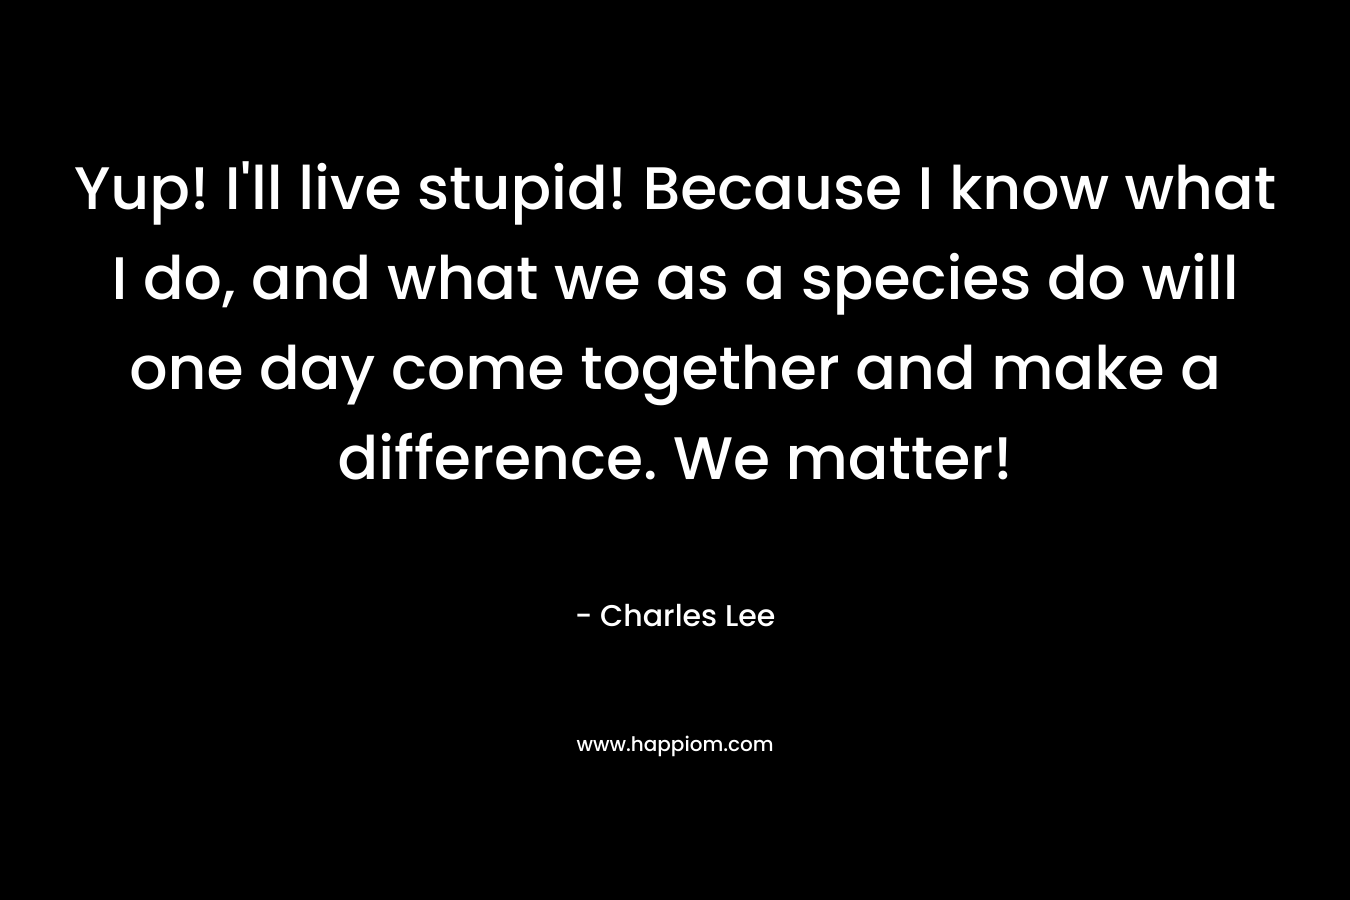 Yup! I'll live stupid! Because I know what I do, and what we as a species do will one day come together and make a difference. We matter!